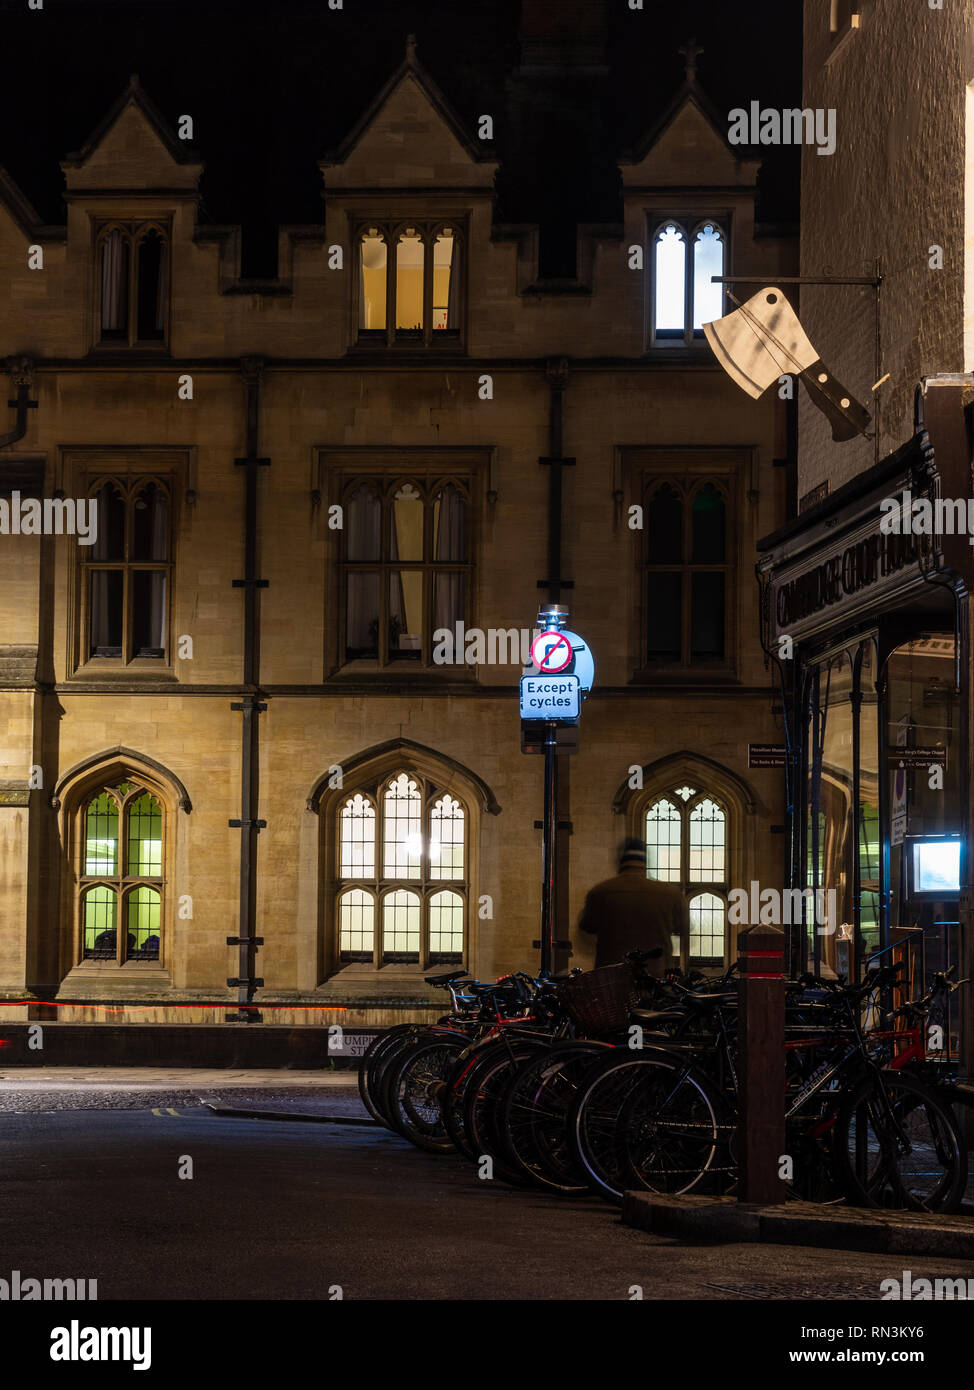 Cambridge, England, UK - January 23, 2019: Bicycles are lined up on Bene't Street outside the Cambridge Chop House and King's College Cambridge at nig Stock Photo